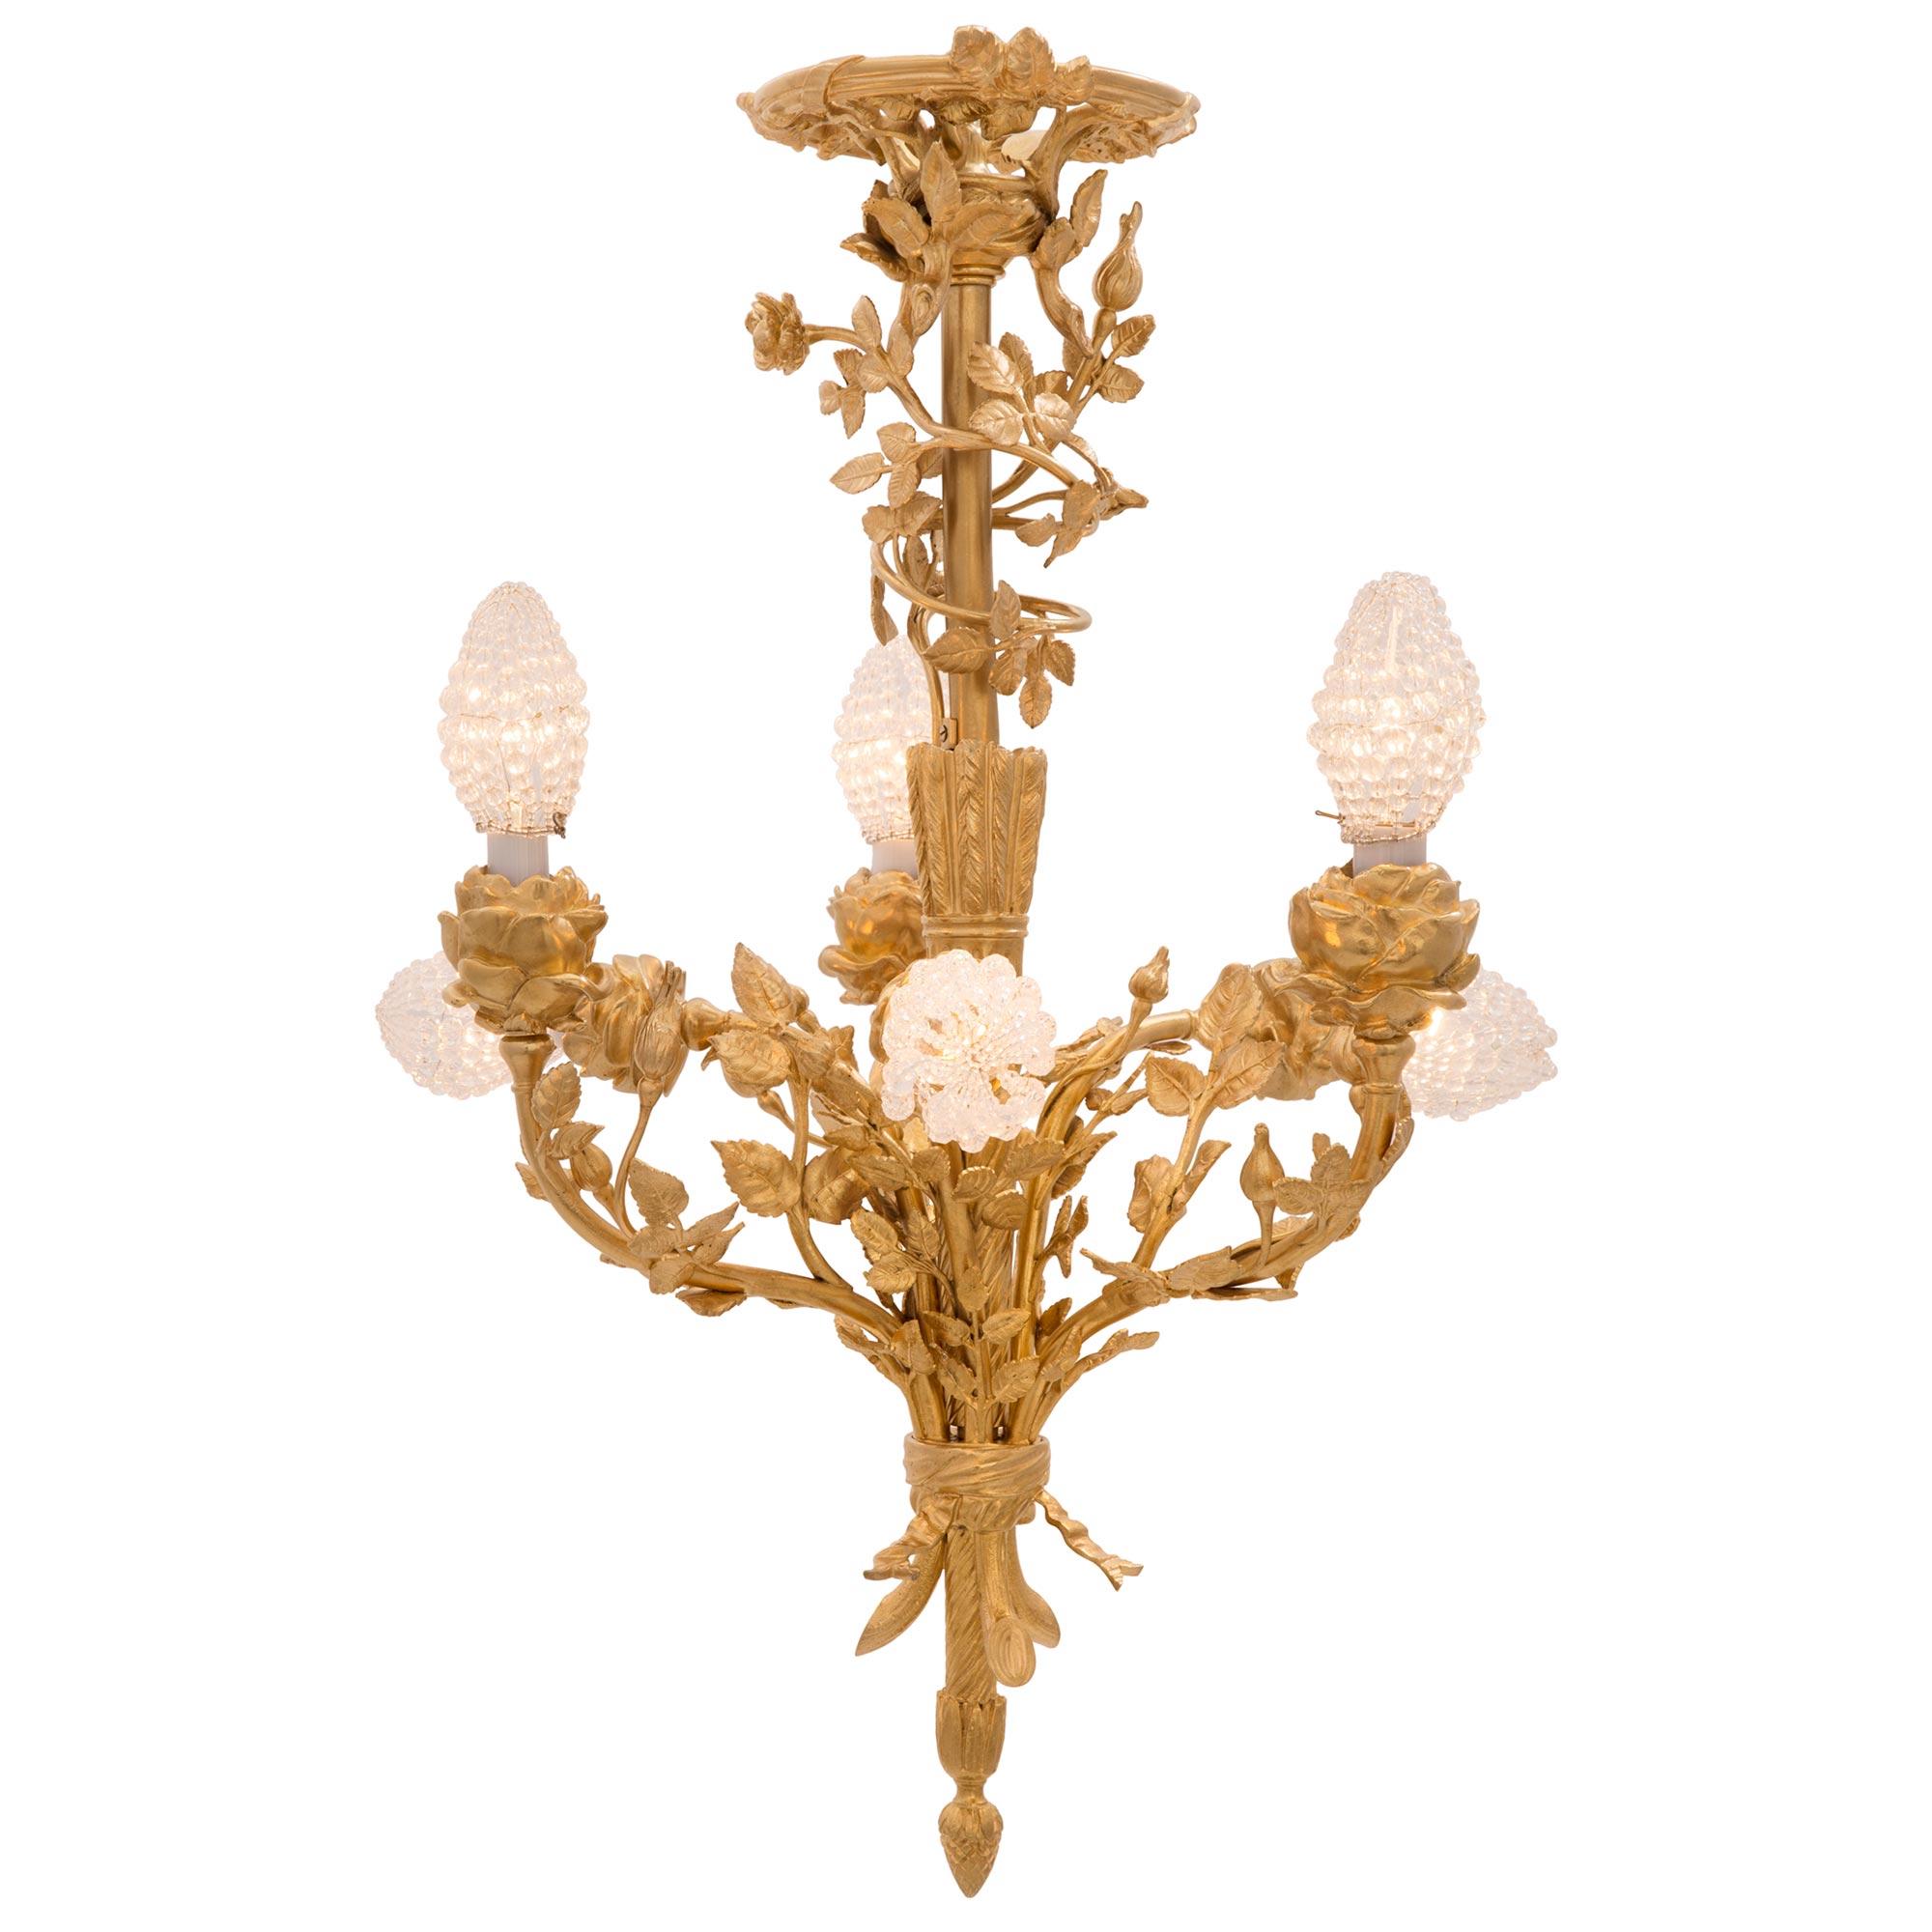 A most elegant French 19th century Louis XVI st. Belle Époque period ormolu chandelier. The six arm chandelier is centered by a beautiful acorn finial below the circular spiral fluted central fut. The six arms display charming wonderfully executed